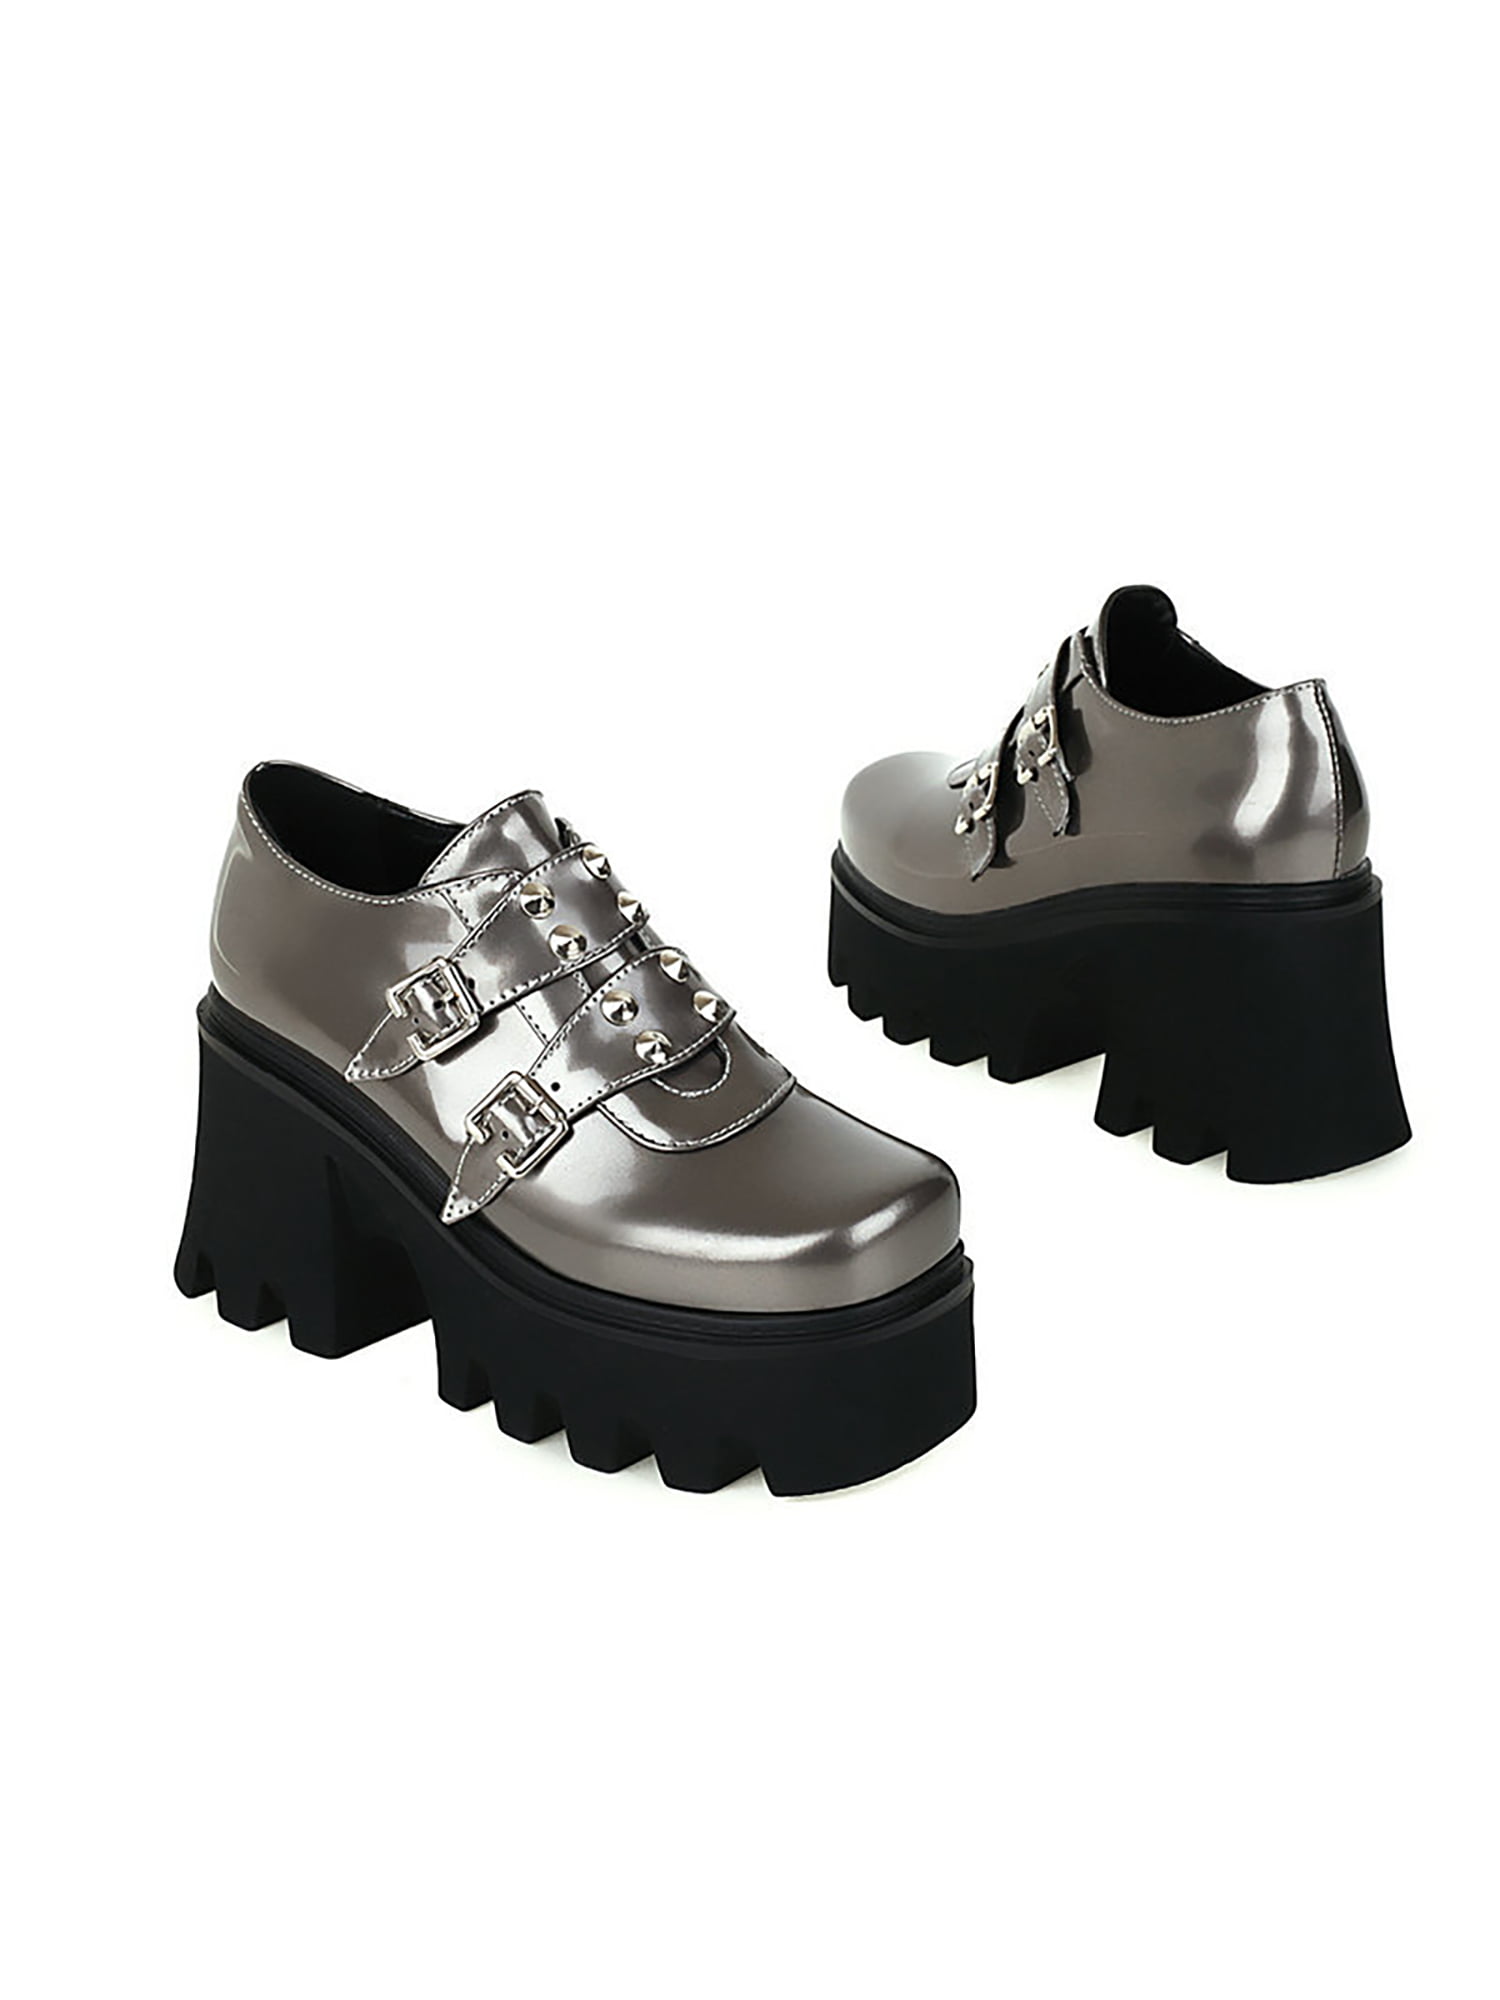 Women's Ankle Boots Platform Wedge High Heel Punk Goth Creepers Casual 2 Colors